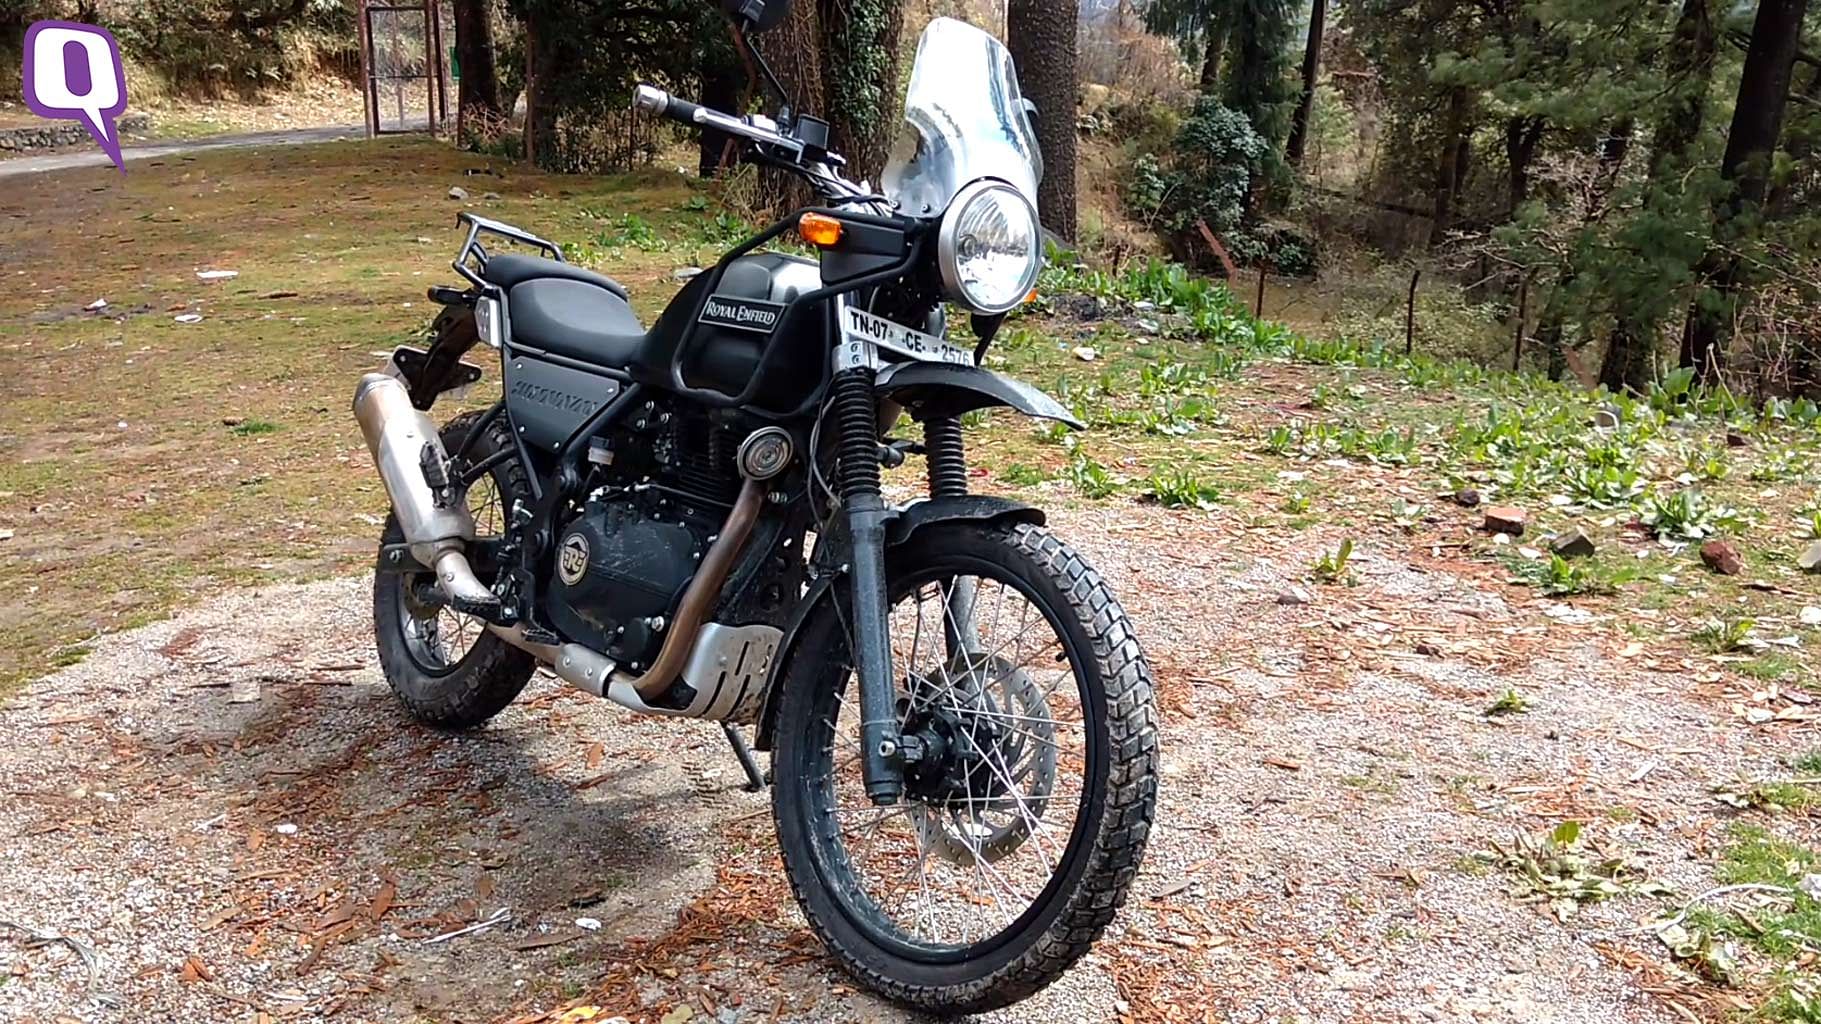 The Royal Enfield Himalayan is set to upgrade to BS6 in 2020.